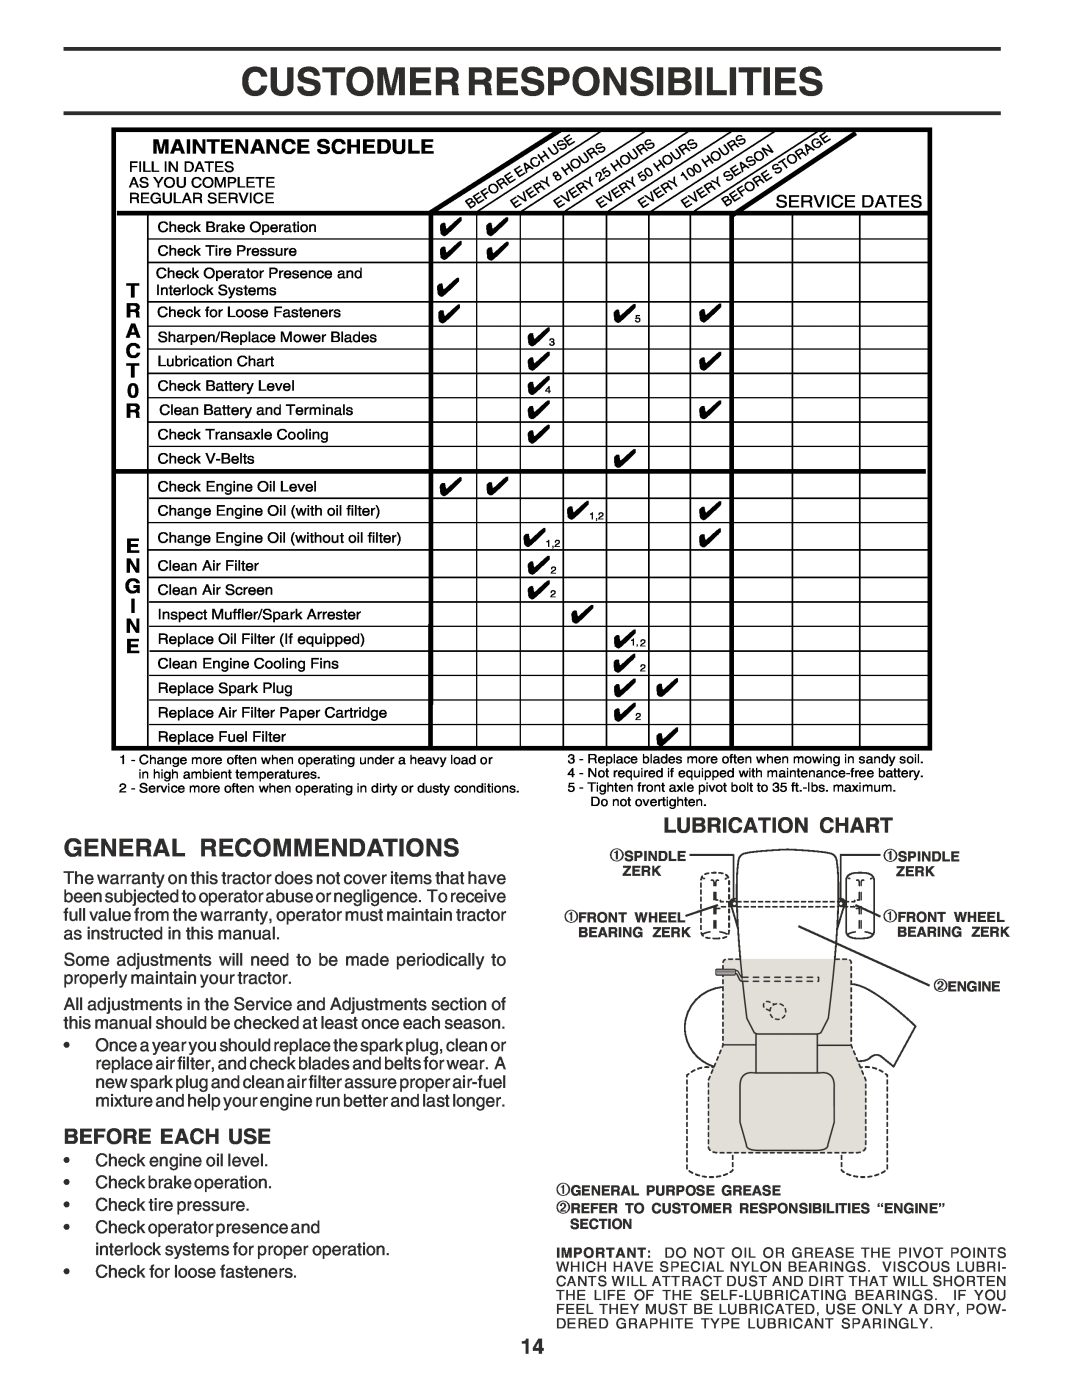 Weed Eater WE1538A manual Customer Responsibilities, General Recommendations, Before Each Use, Lubrication Chart 